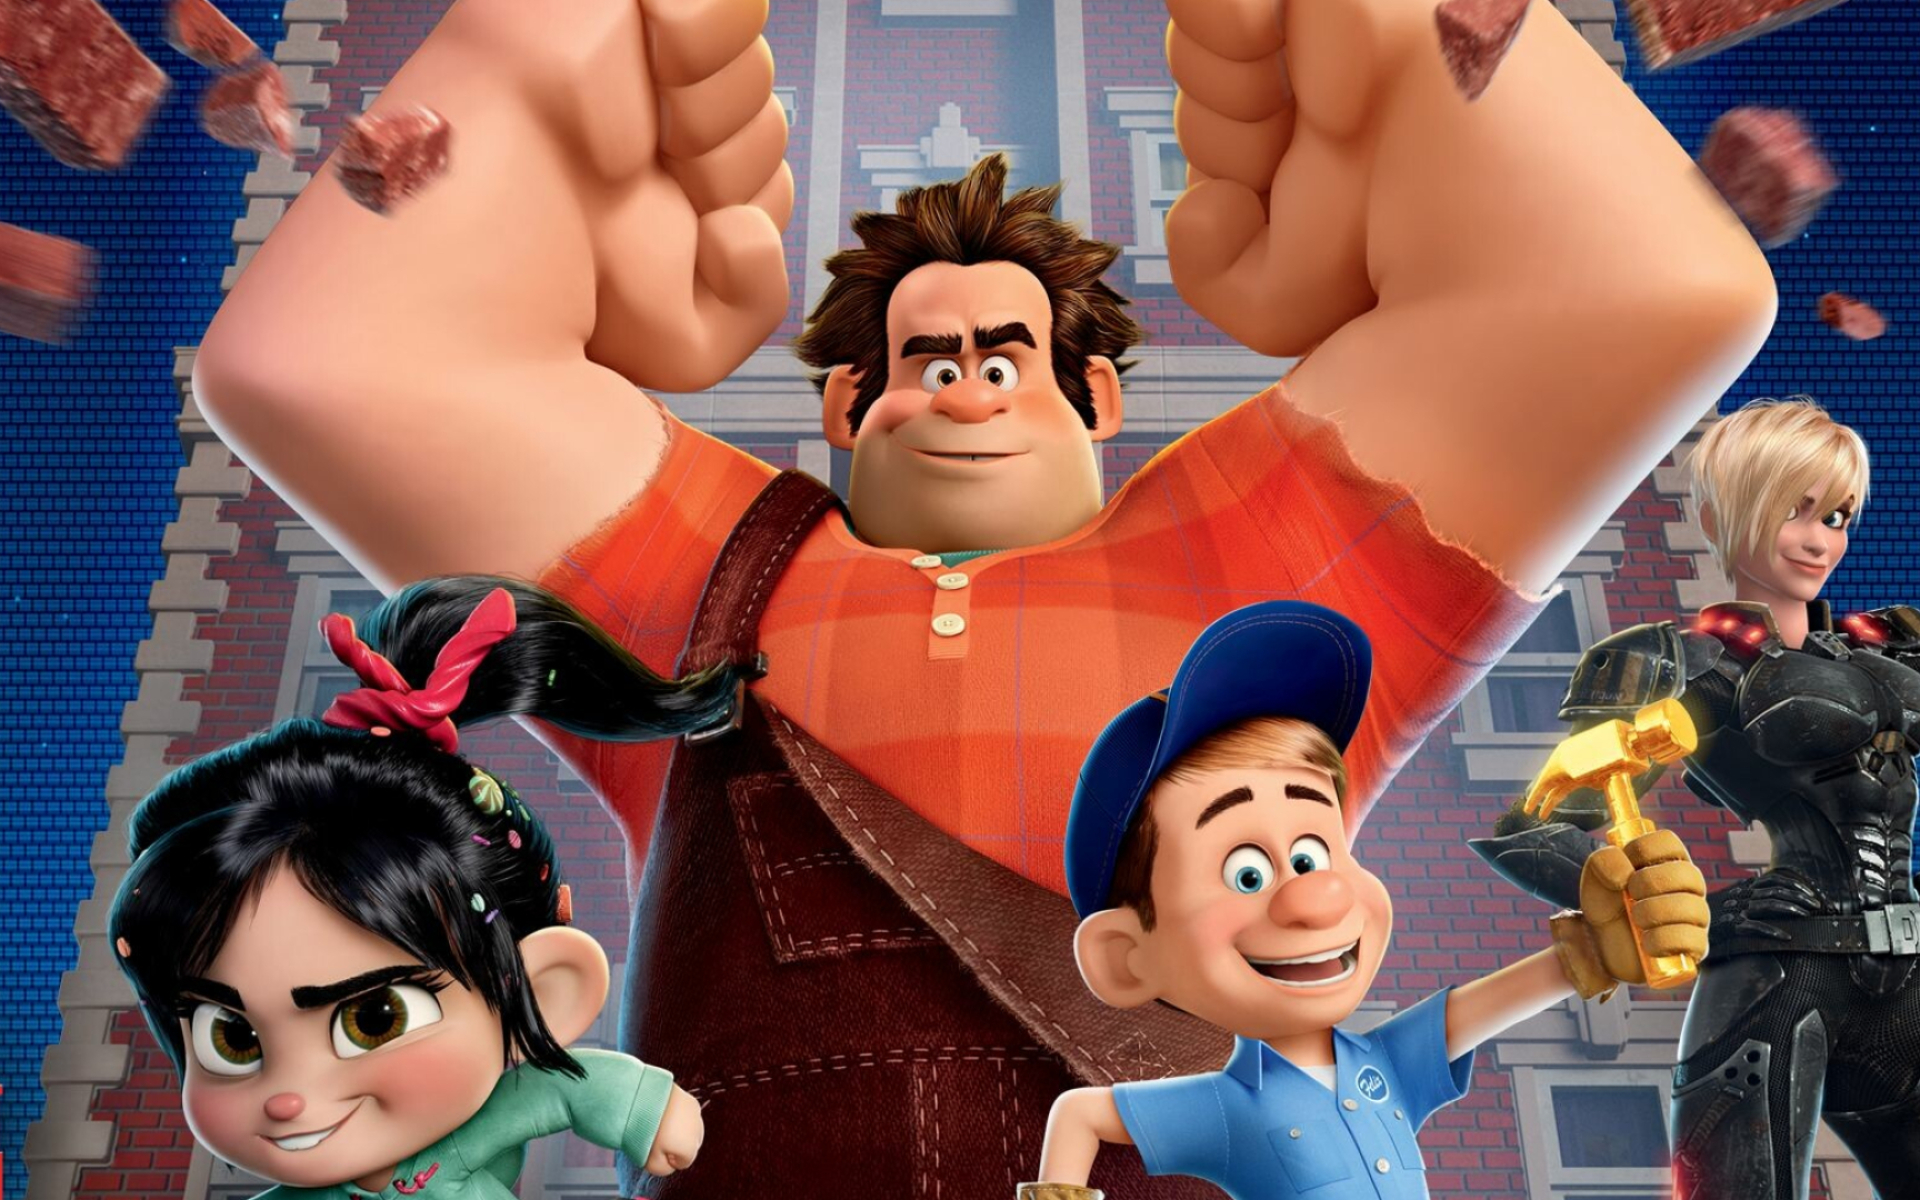 Wreck-It Ralph: Upon meeting the young, feisty misfit Vanellope, he learns that having medals and an abundance of praise isn't what makes a good guy, but showing love and care for others does. 1920x1200 HD Background.